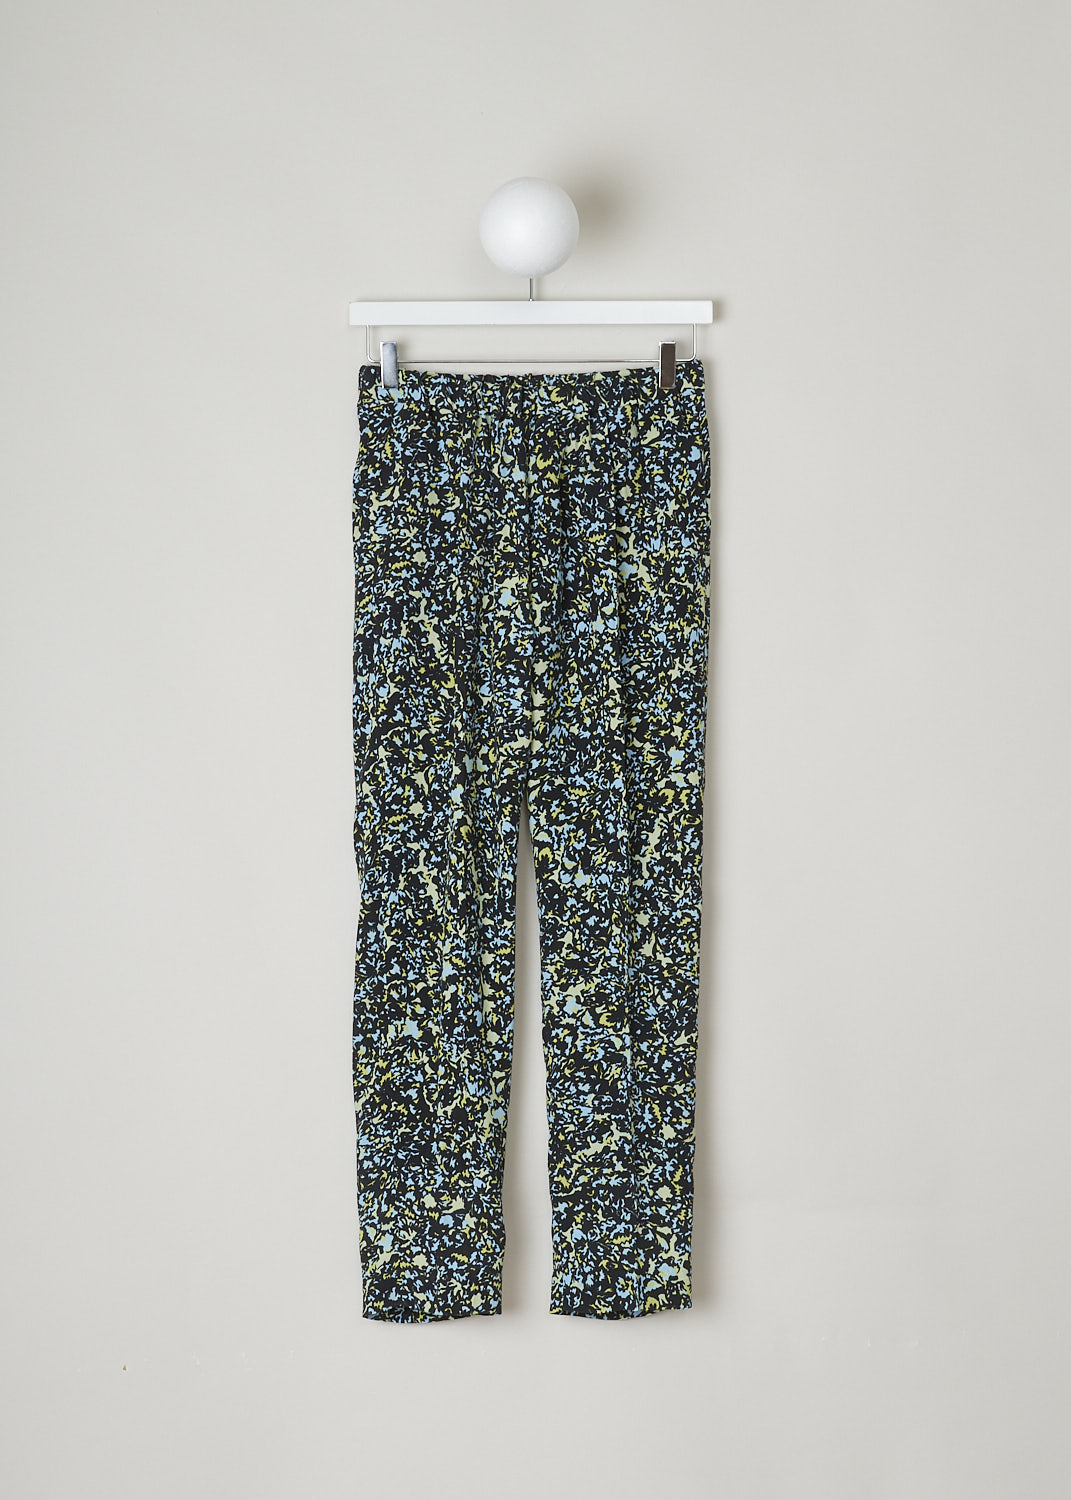 DRIES VAN NOTEN, PANTS WITH GREEN AND BLUE ABSTRACT PRINT, PALMIRA_6175_WW_PANTS_BLUE, Black, Green, Blue, Front, These pants have a black base with a green and blue abstract print. These slip-on pants have an elasticated waistband with a drawstring on the inside. This model has slanted pockets. The tapered legs have a centre crease front and back.
